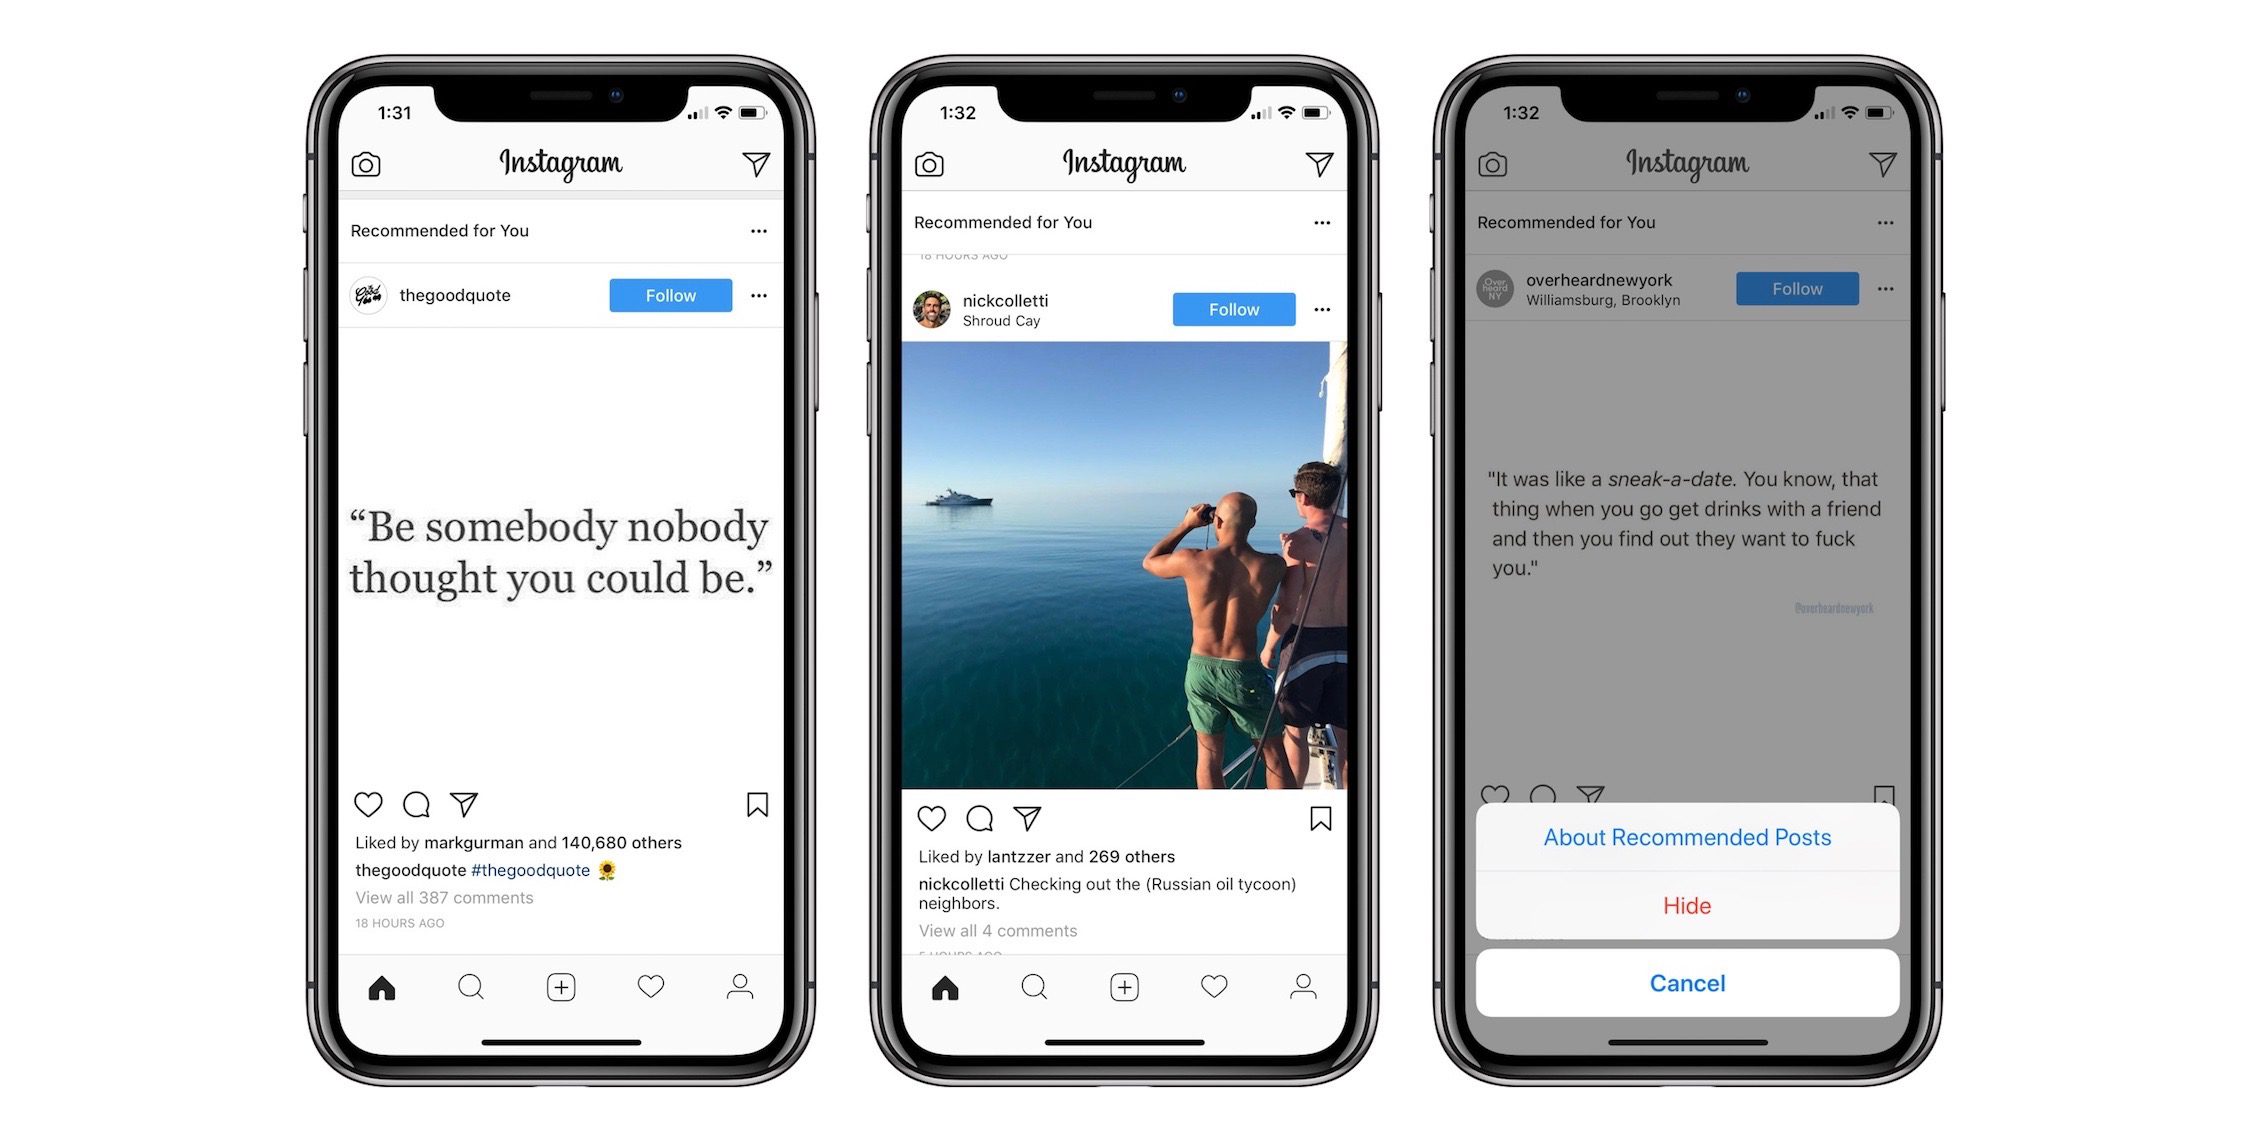 download videos from instagram on iphone